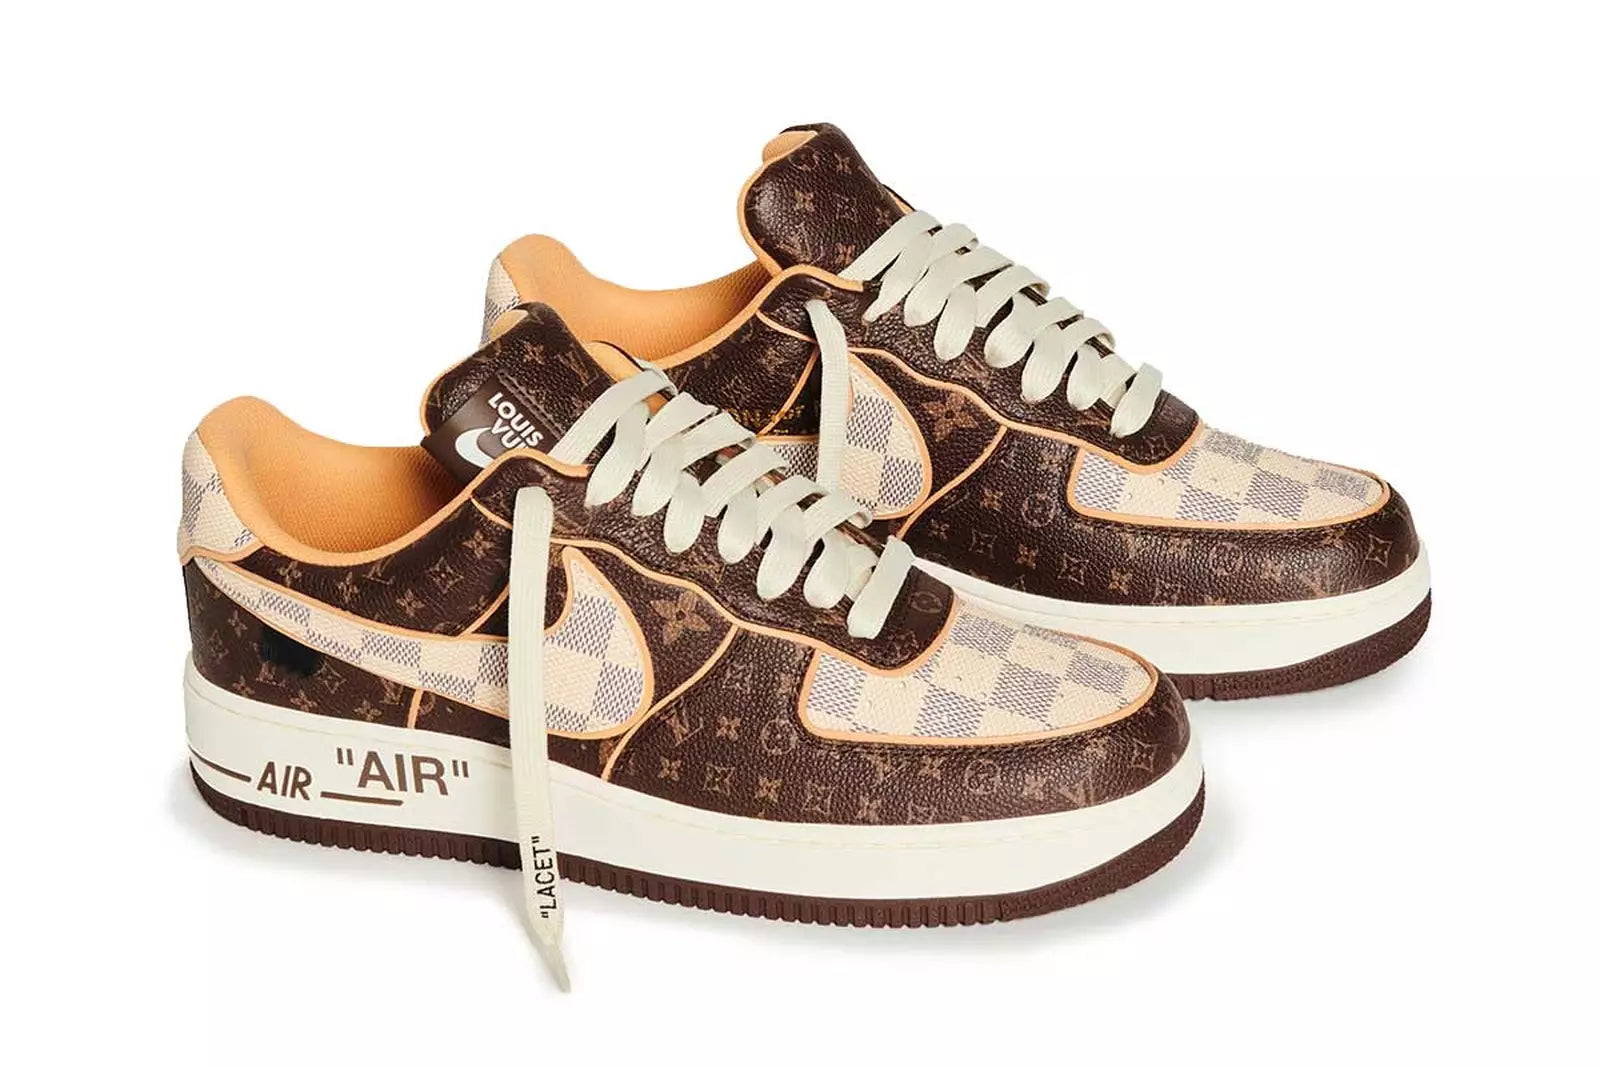 Nike x Louis Vuitton Air Force 1 Sneakers - Gold